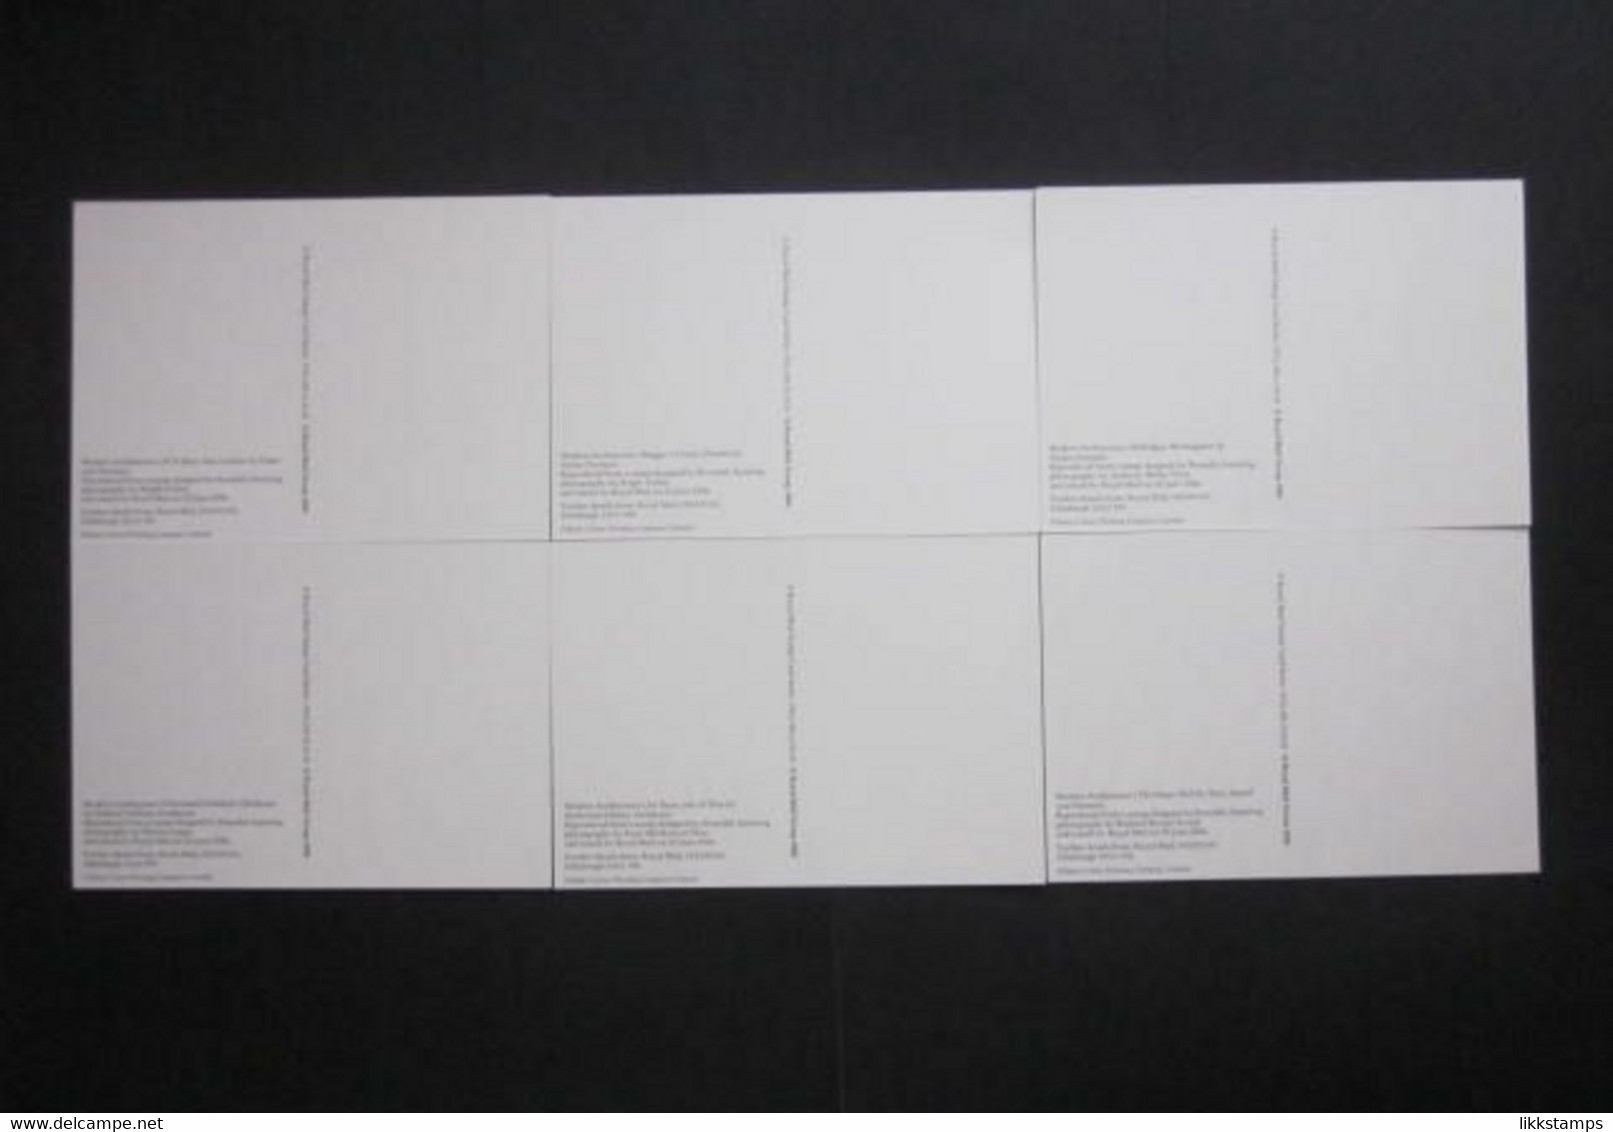 2006 MODERN ARCHITECTURE P.H.Q. CARDS UNUSED, ISSUE No. 288 (B) #00791 - PHQ Cards